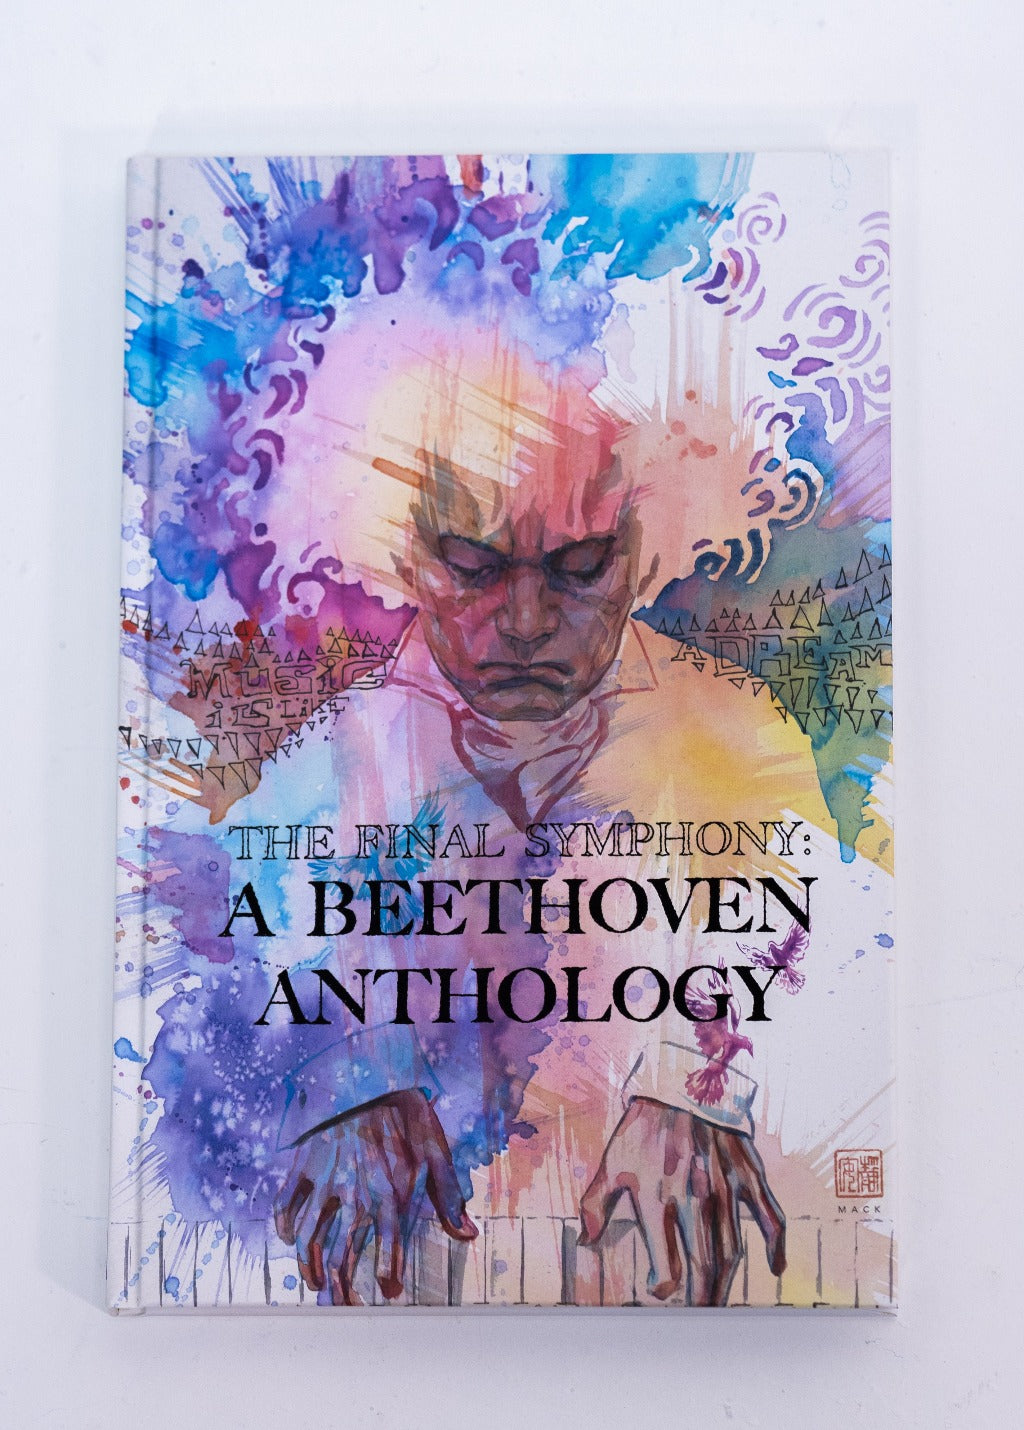 Ludwig van Beethoven - The Final Symphony: A Beethoven Anthology Deluxe Book